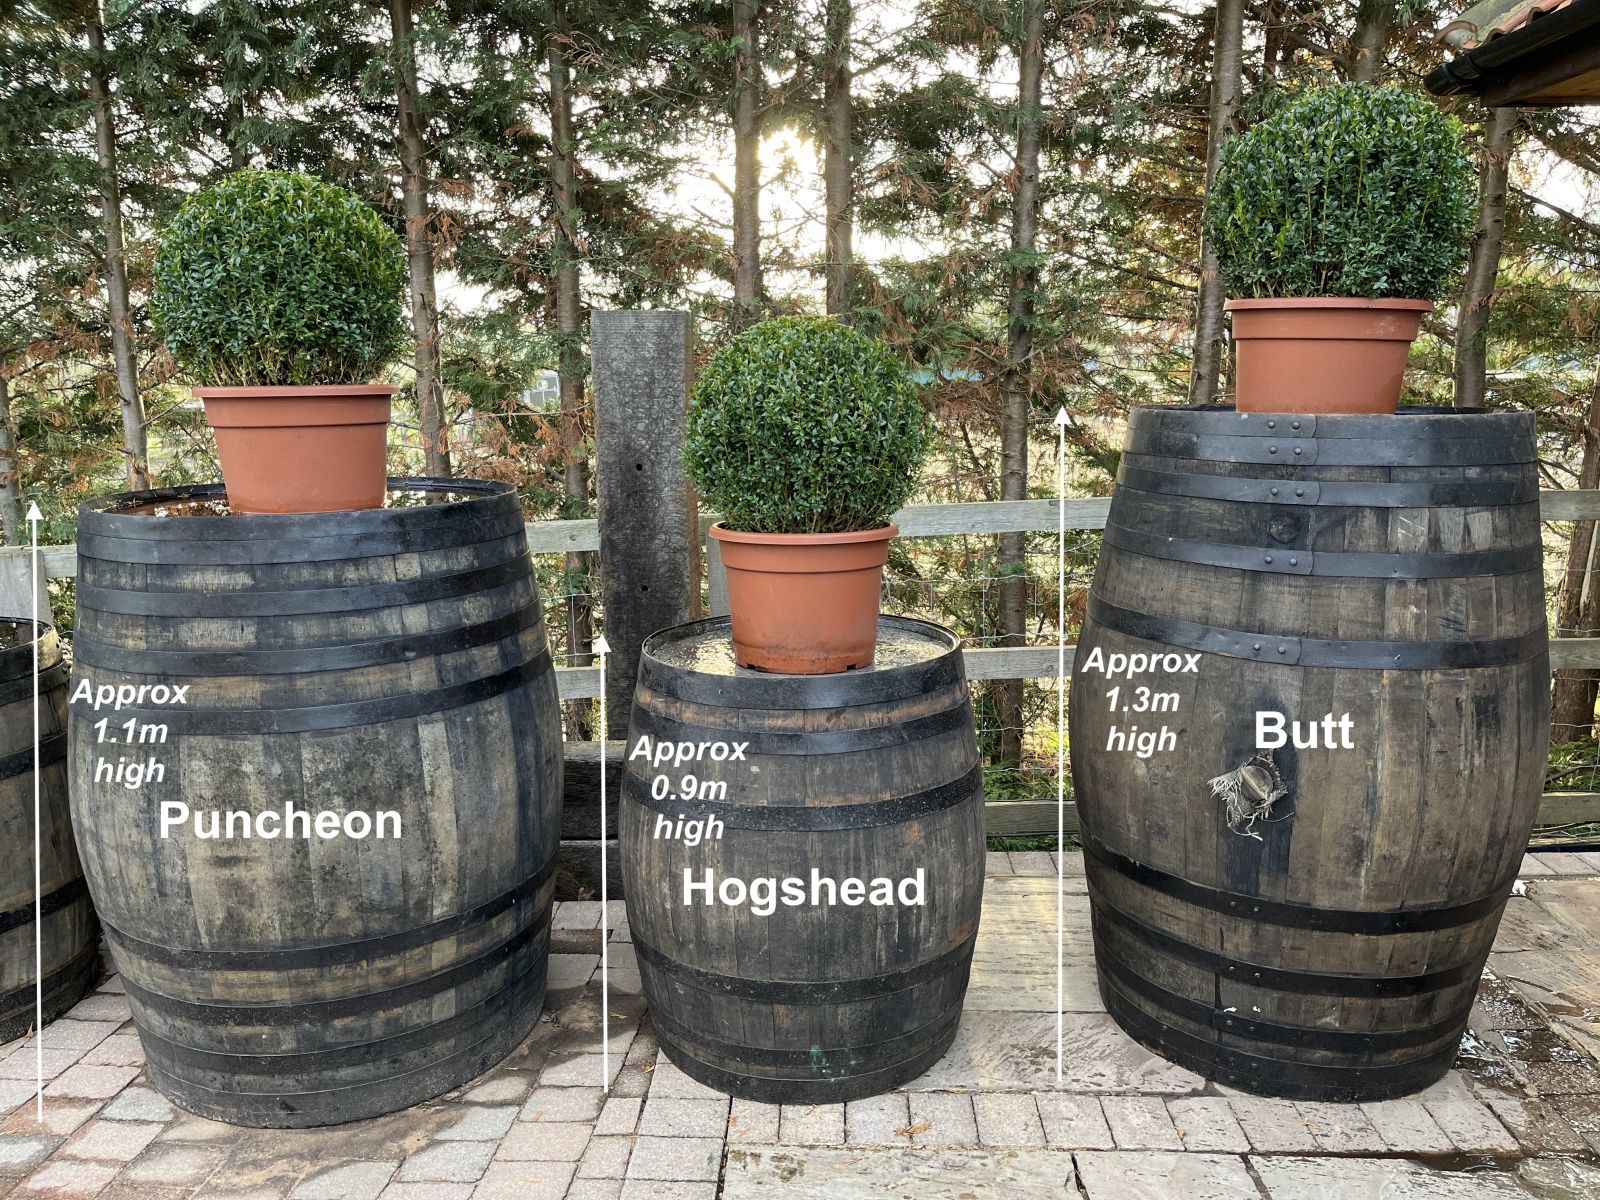 The heights and measurements of oak barrels, Butts, Puncheons and Hogsheads. Railwaysleepers.com